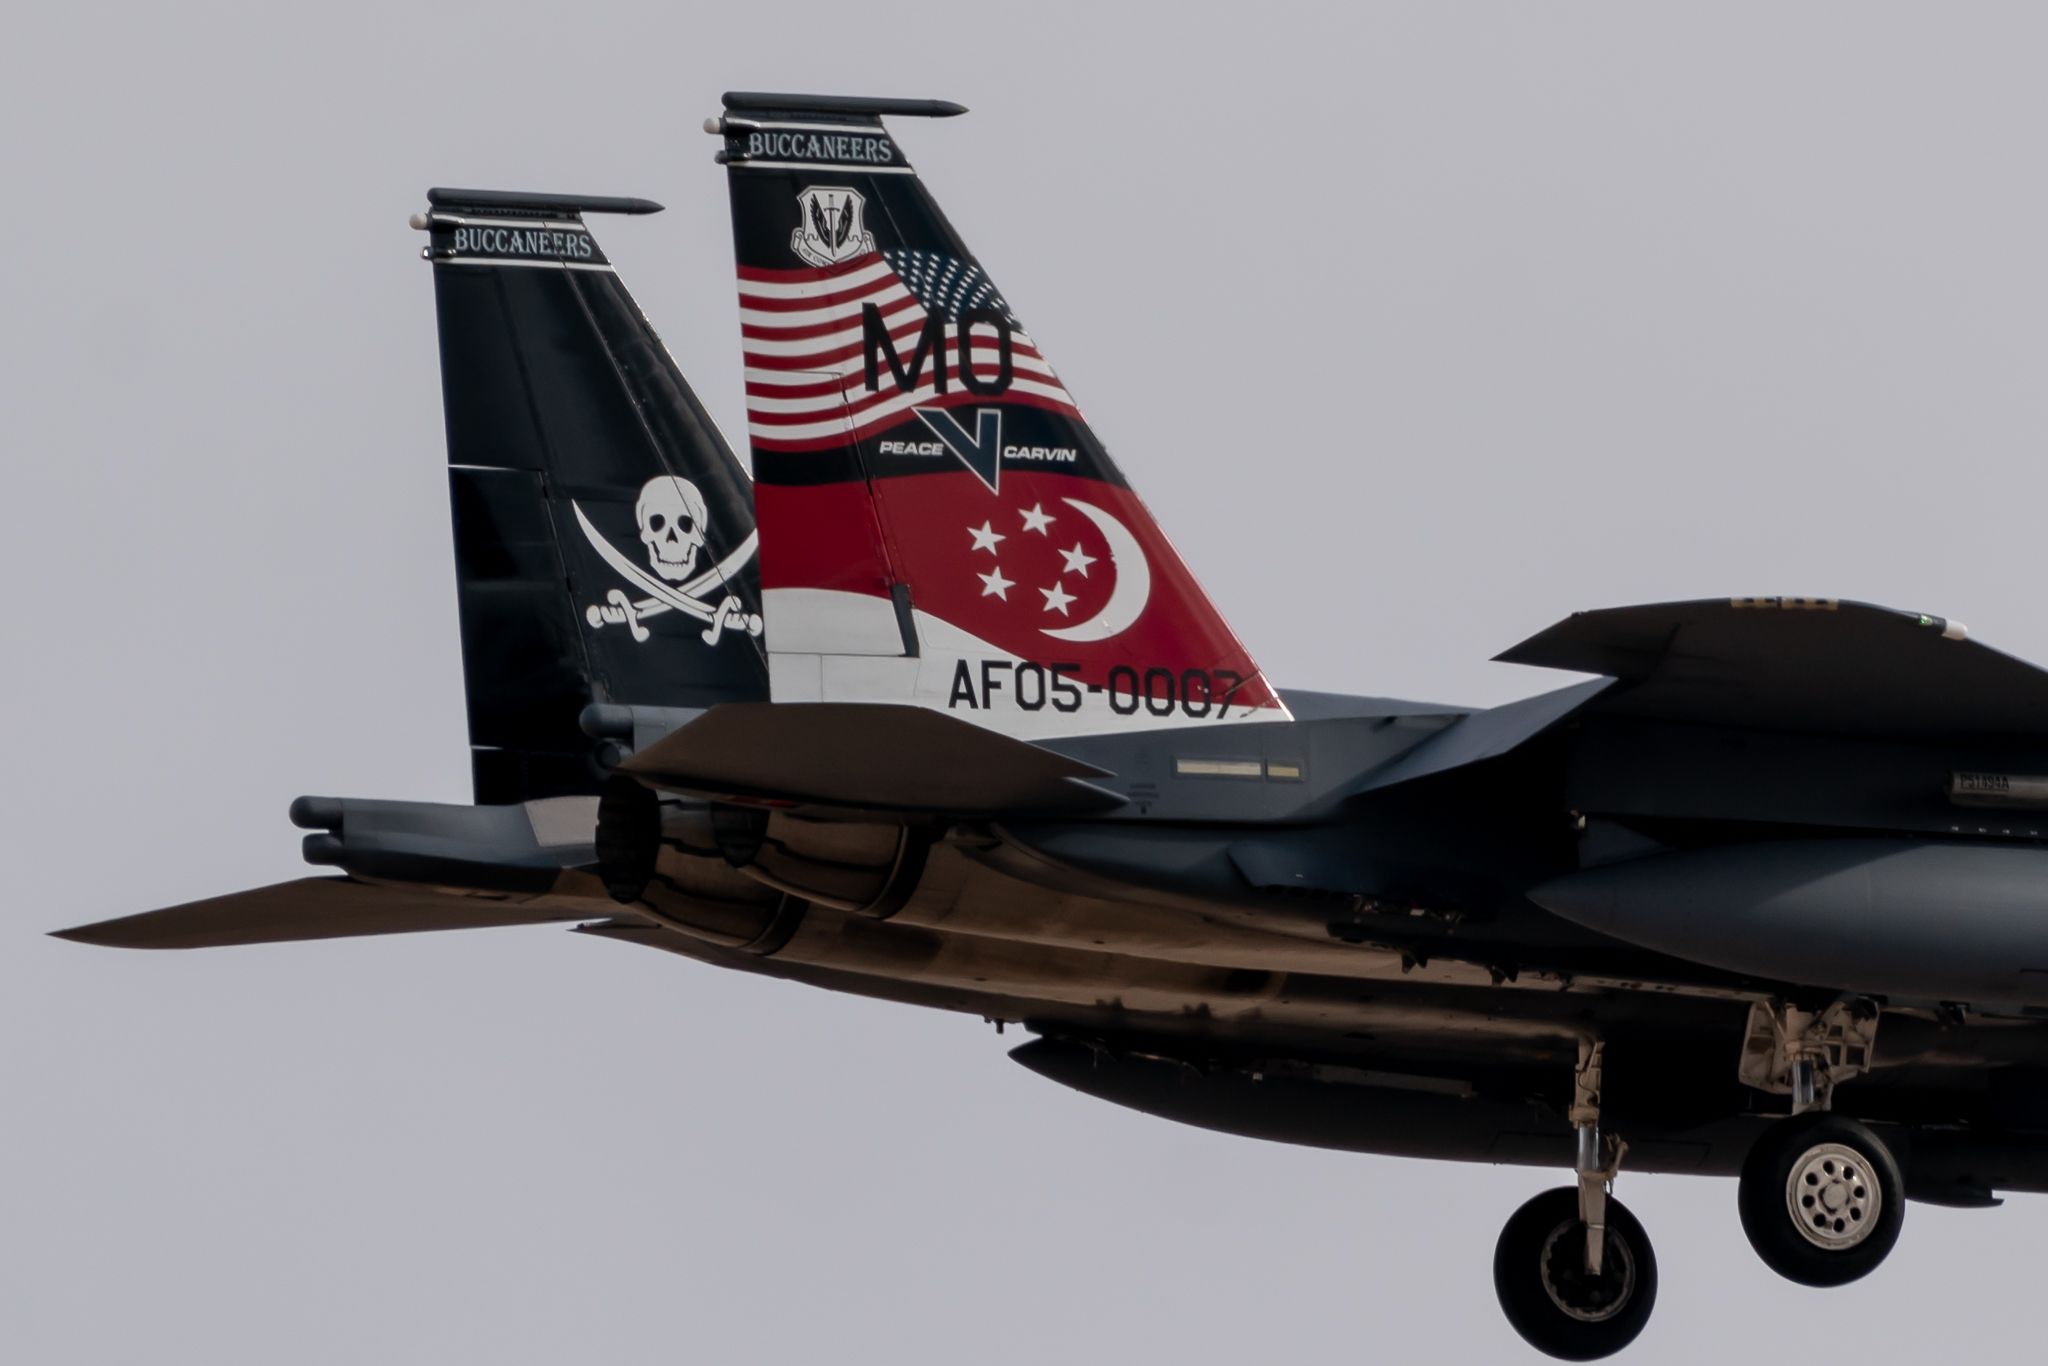 05-0007 — - Republic of Singapore AF assigned to Mountain Home AFB